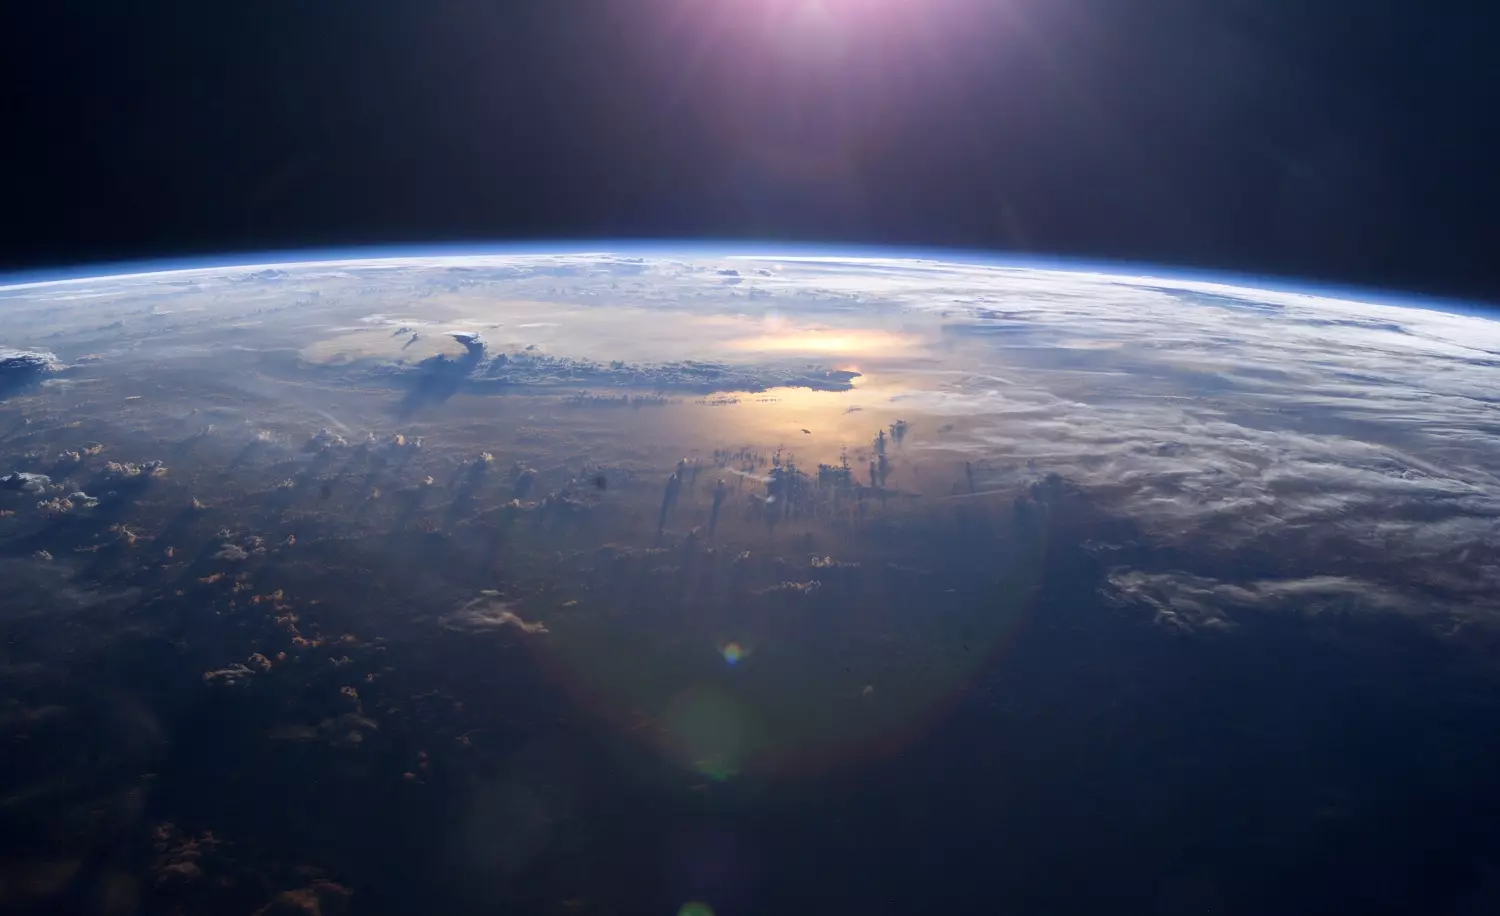 Earth from above showing thunderheads above the ocean reflecting sunlight, photo credit: NASA